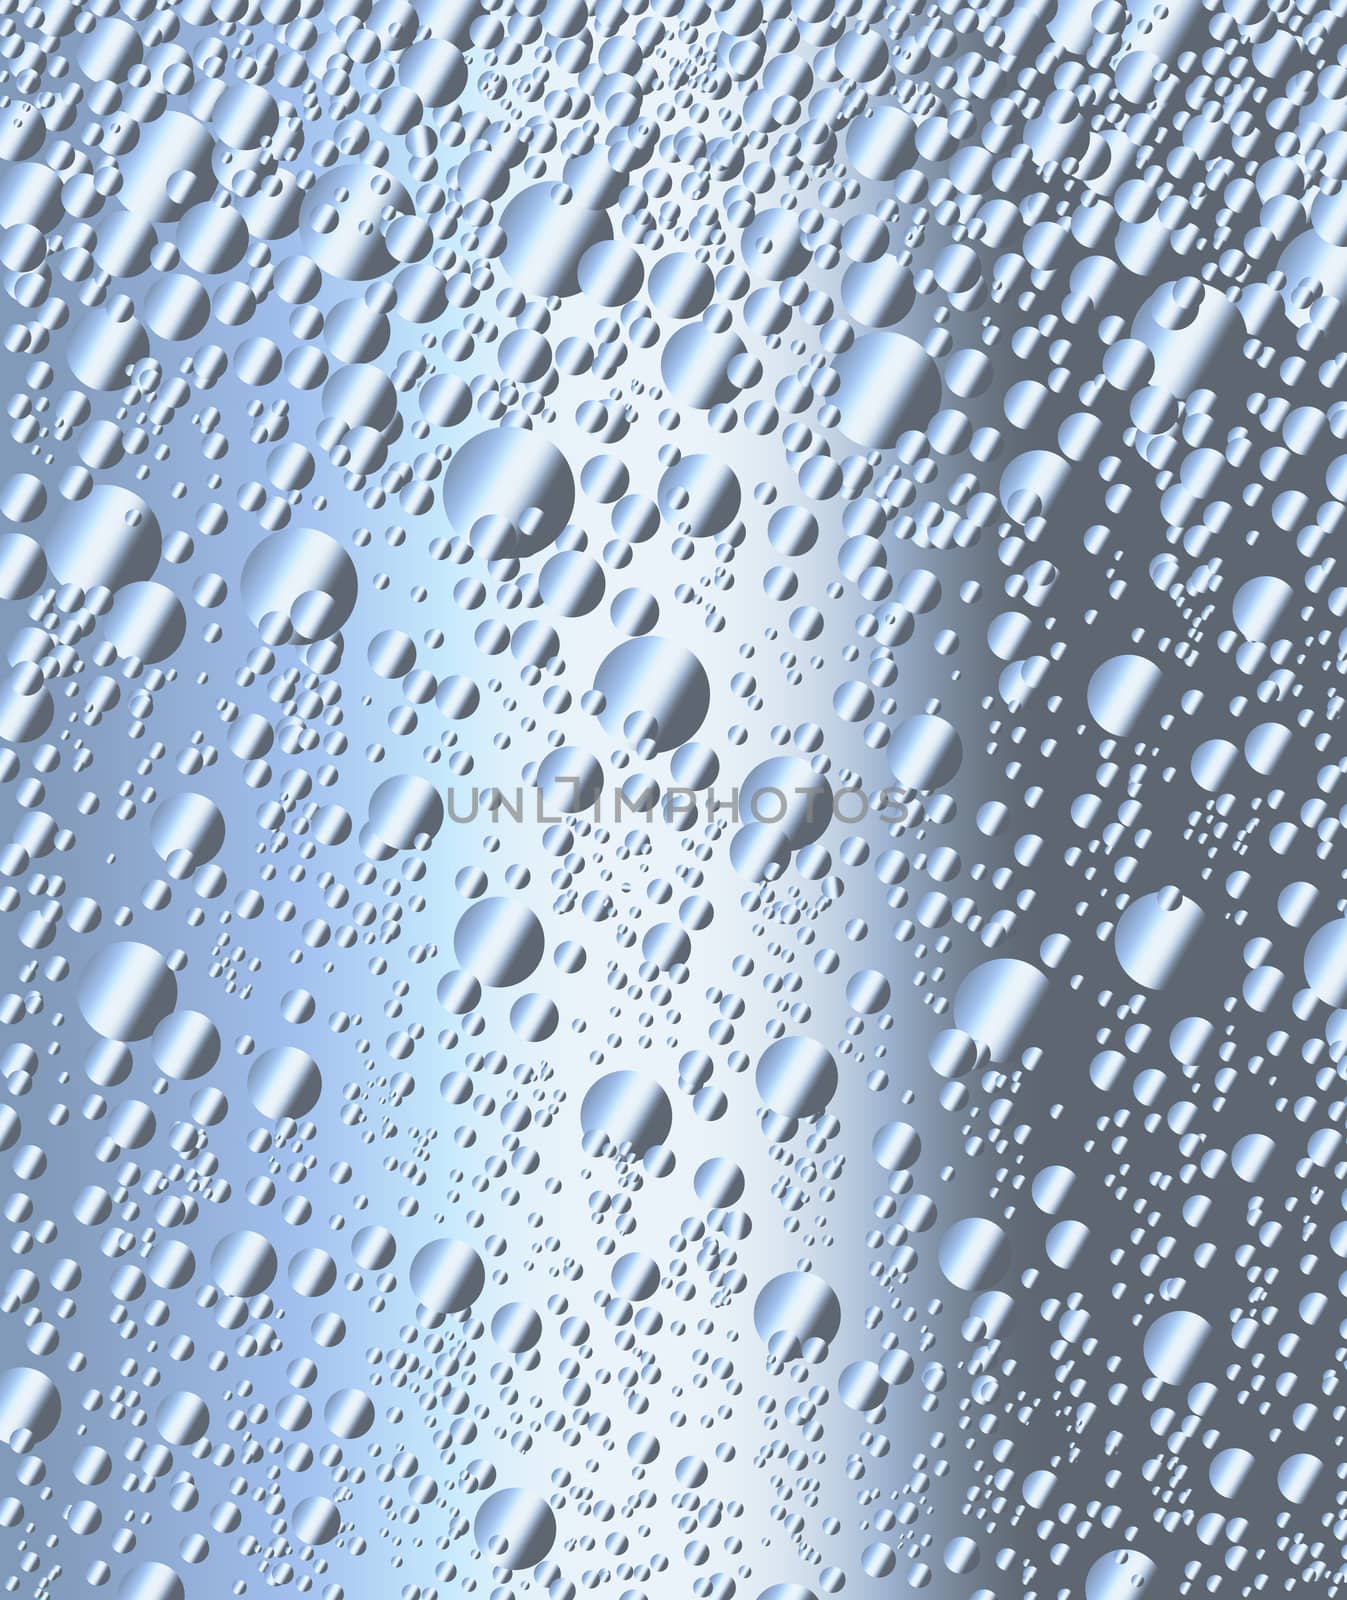 Bubbles of quicksilver or mercury on a silver background